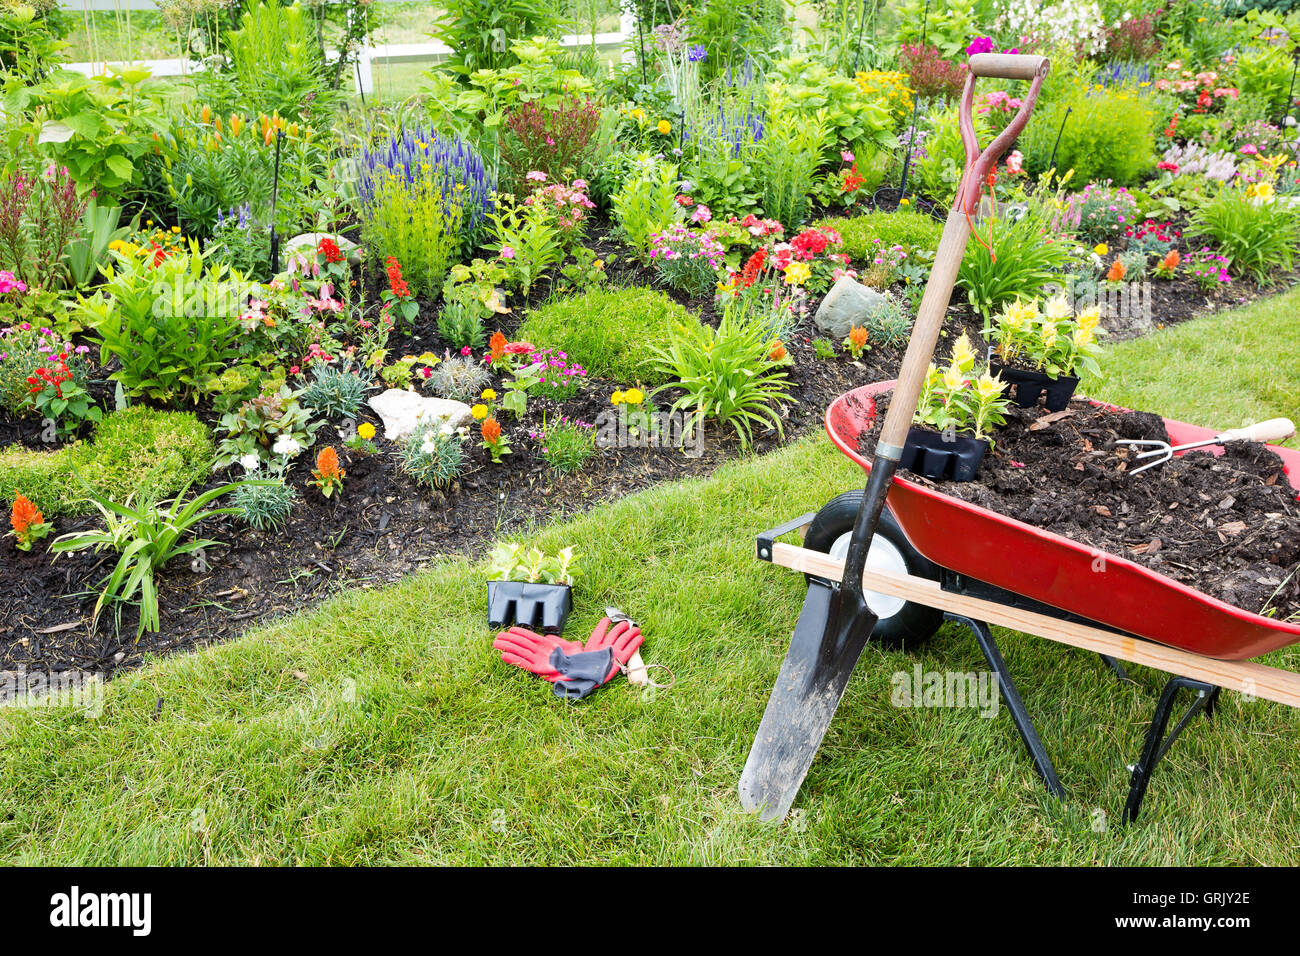 Gardening equipment ready for use in a garden with beautiful plants and flowers Stock Photo